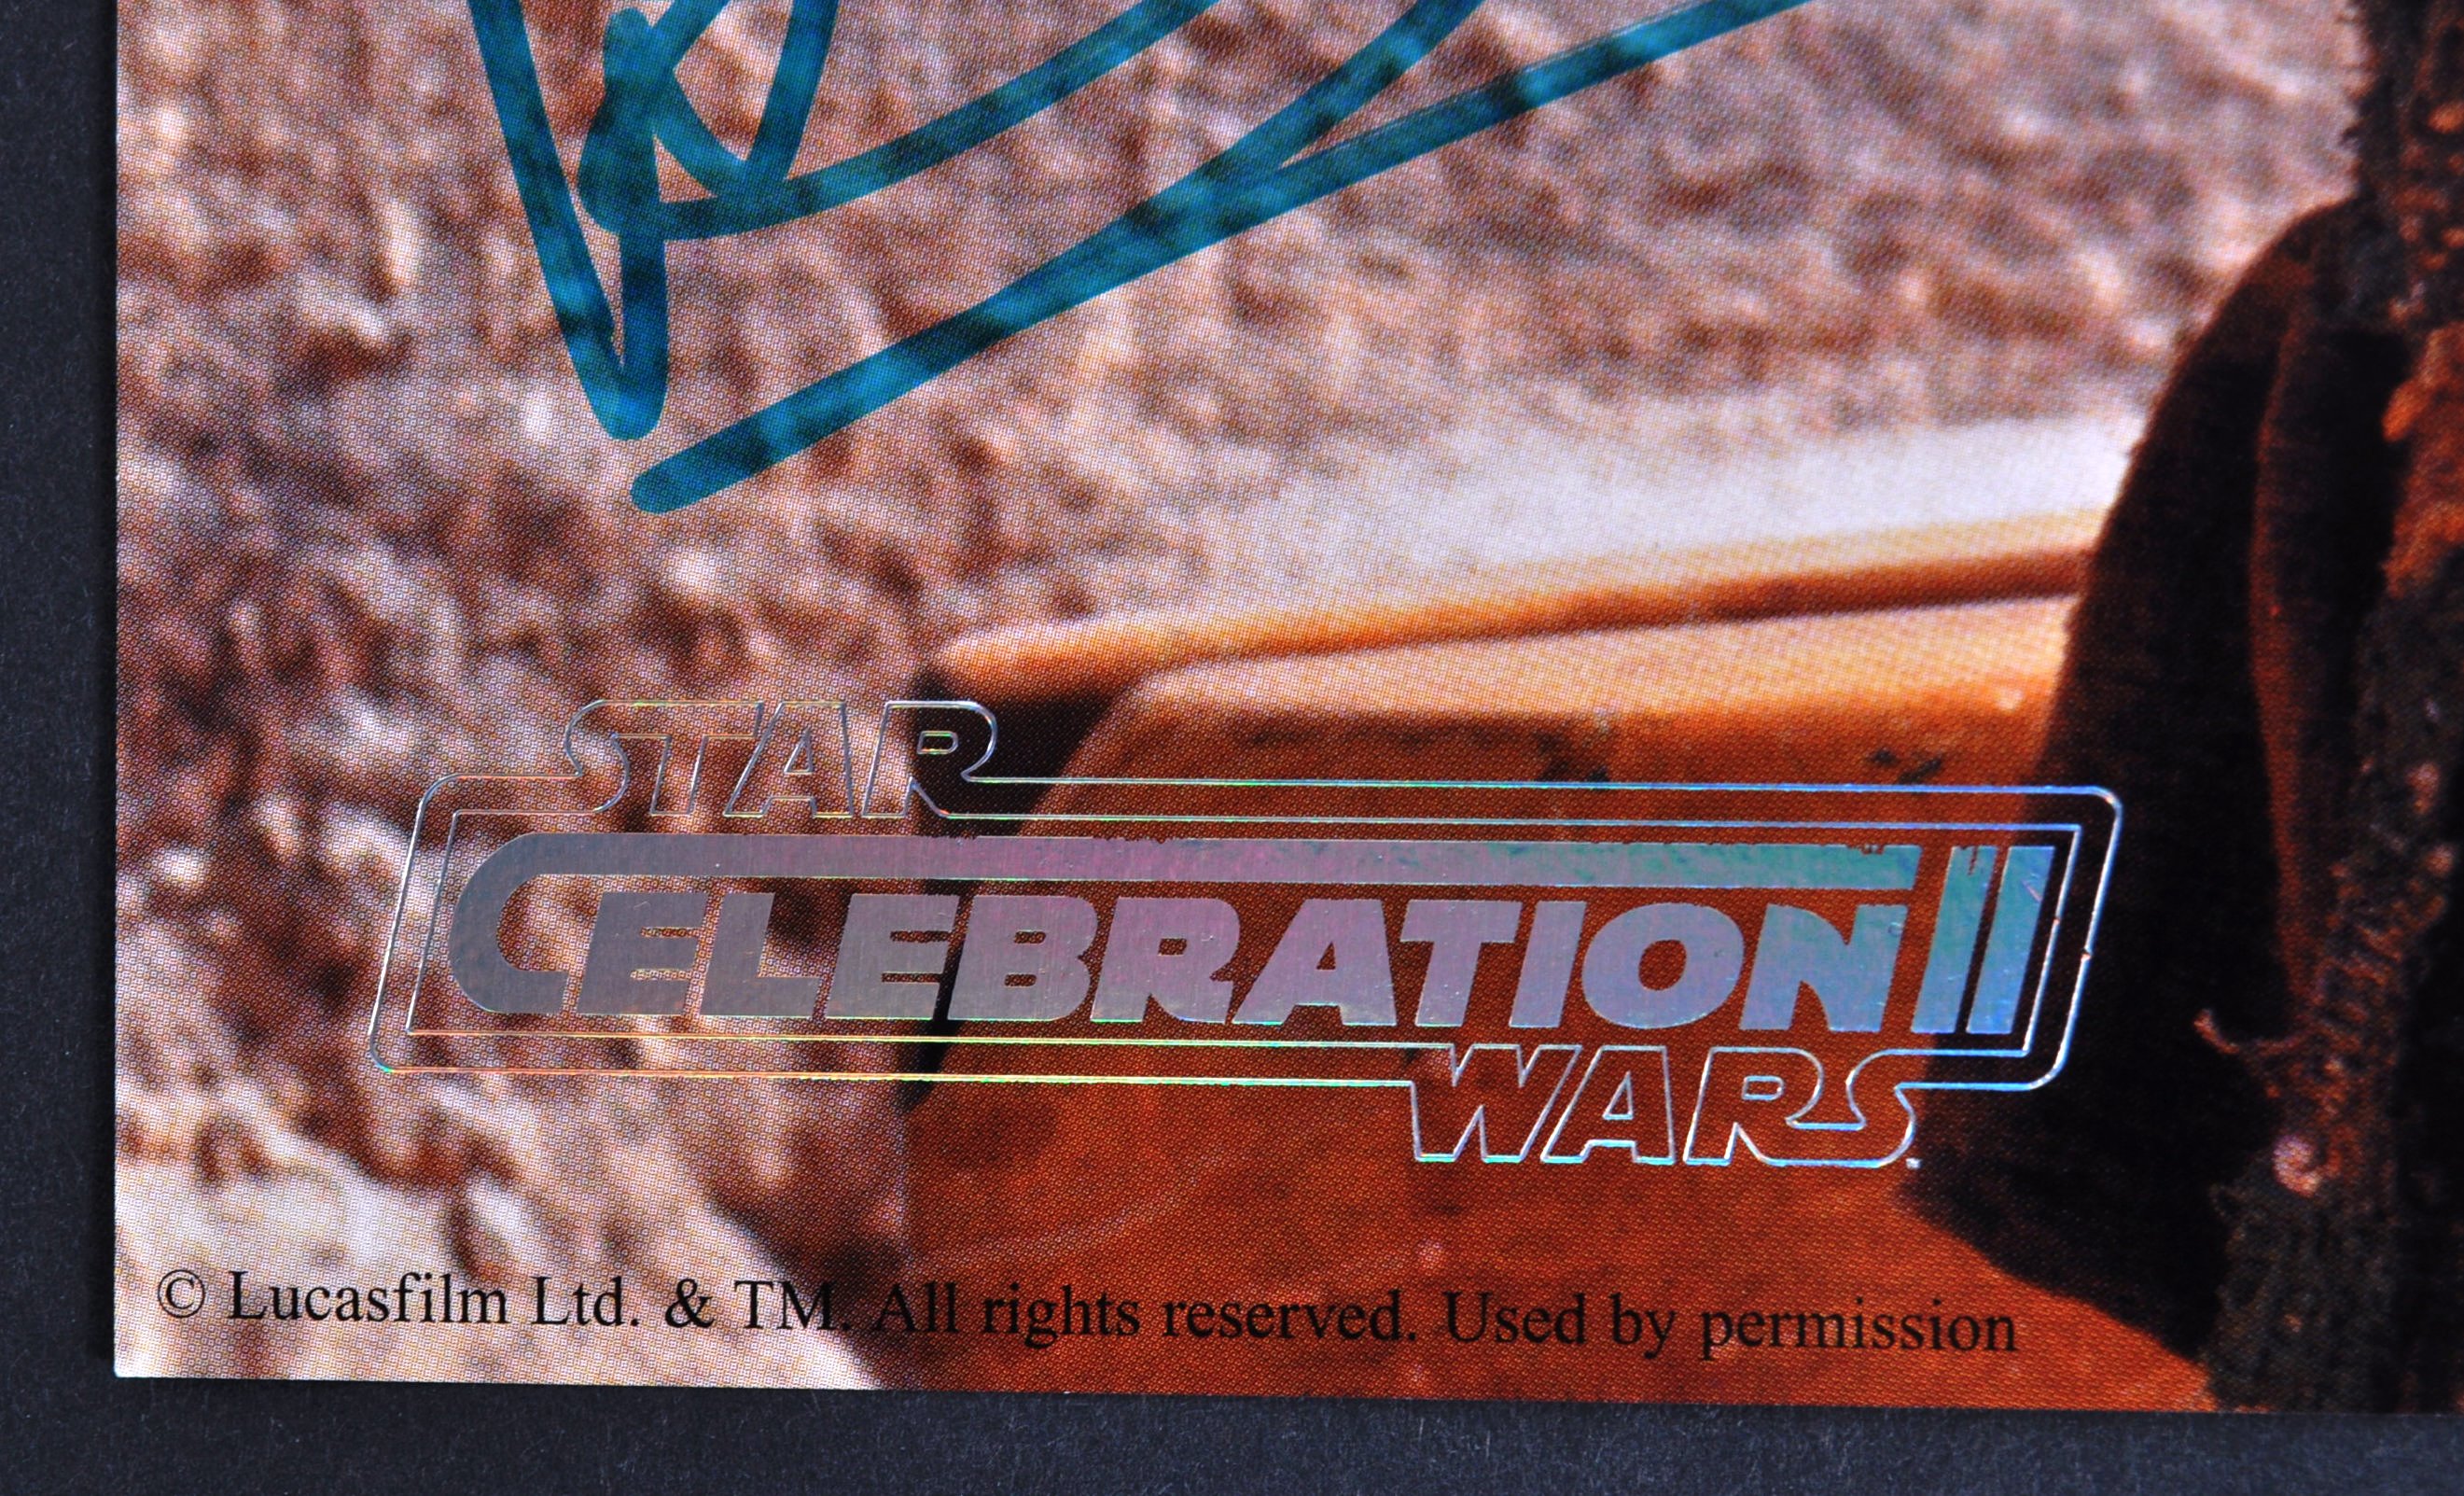 STAR WARS CELEBRATION II - OFFICIAL AUTOGRAPHED 8X10" PHOTO - Image 3 of 3